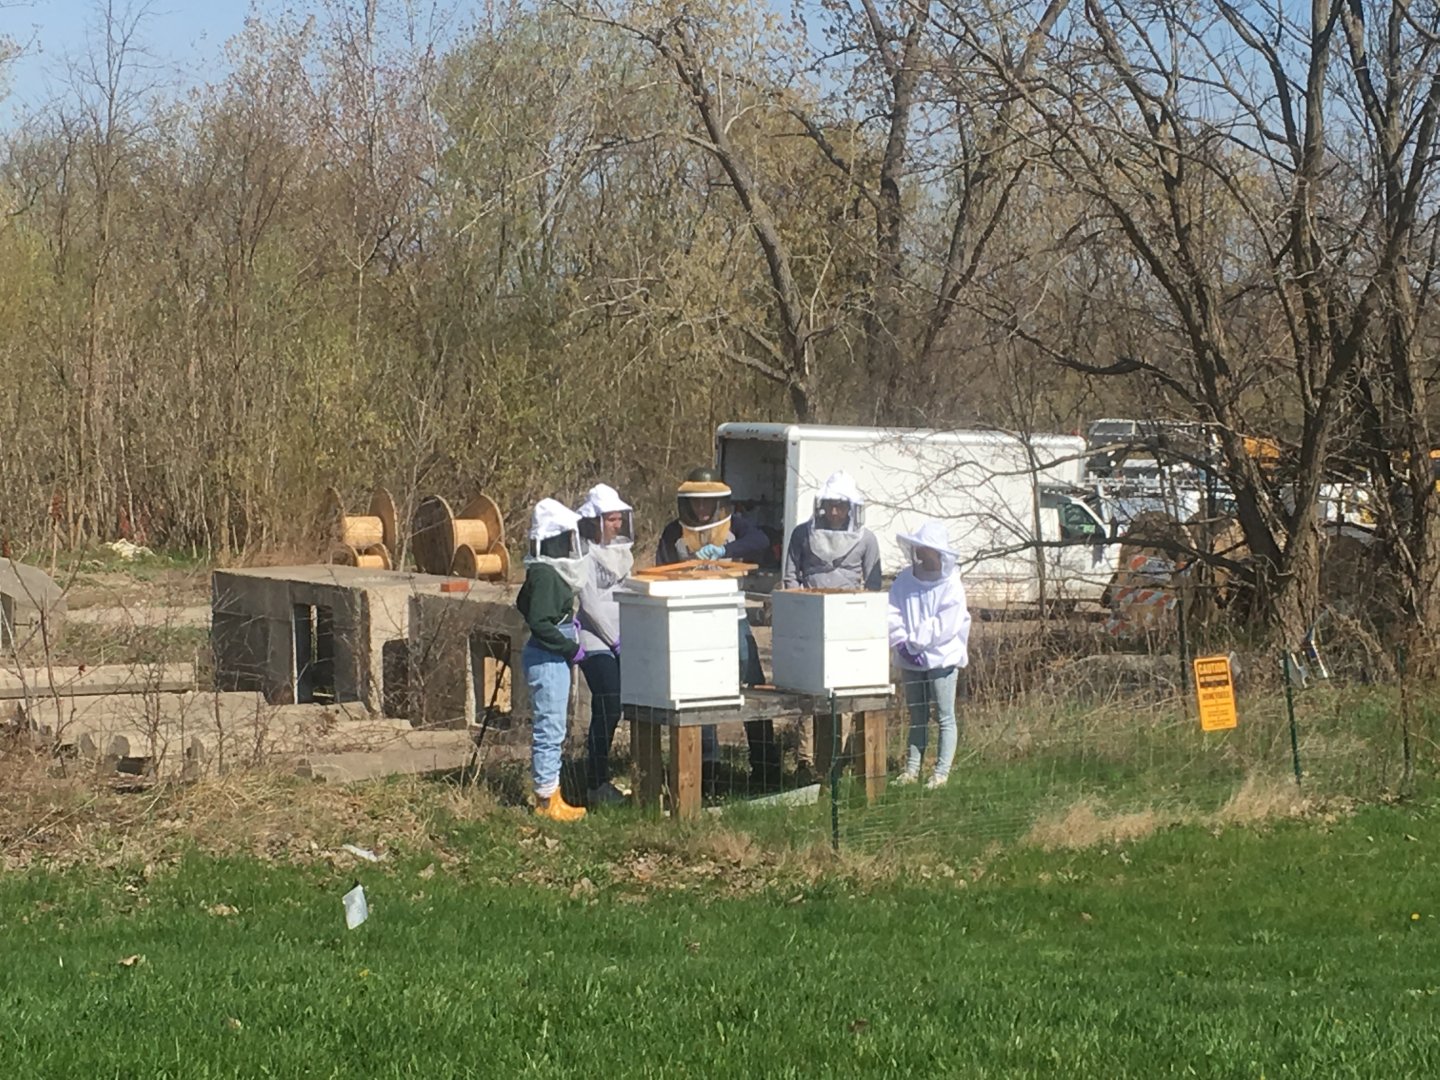 Five club members gathered around our two hives